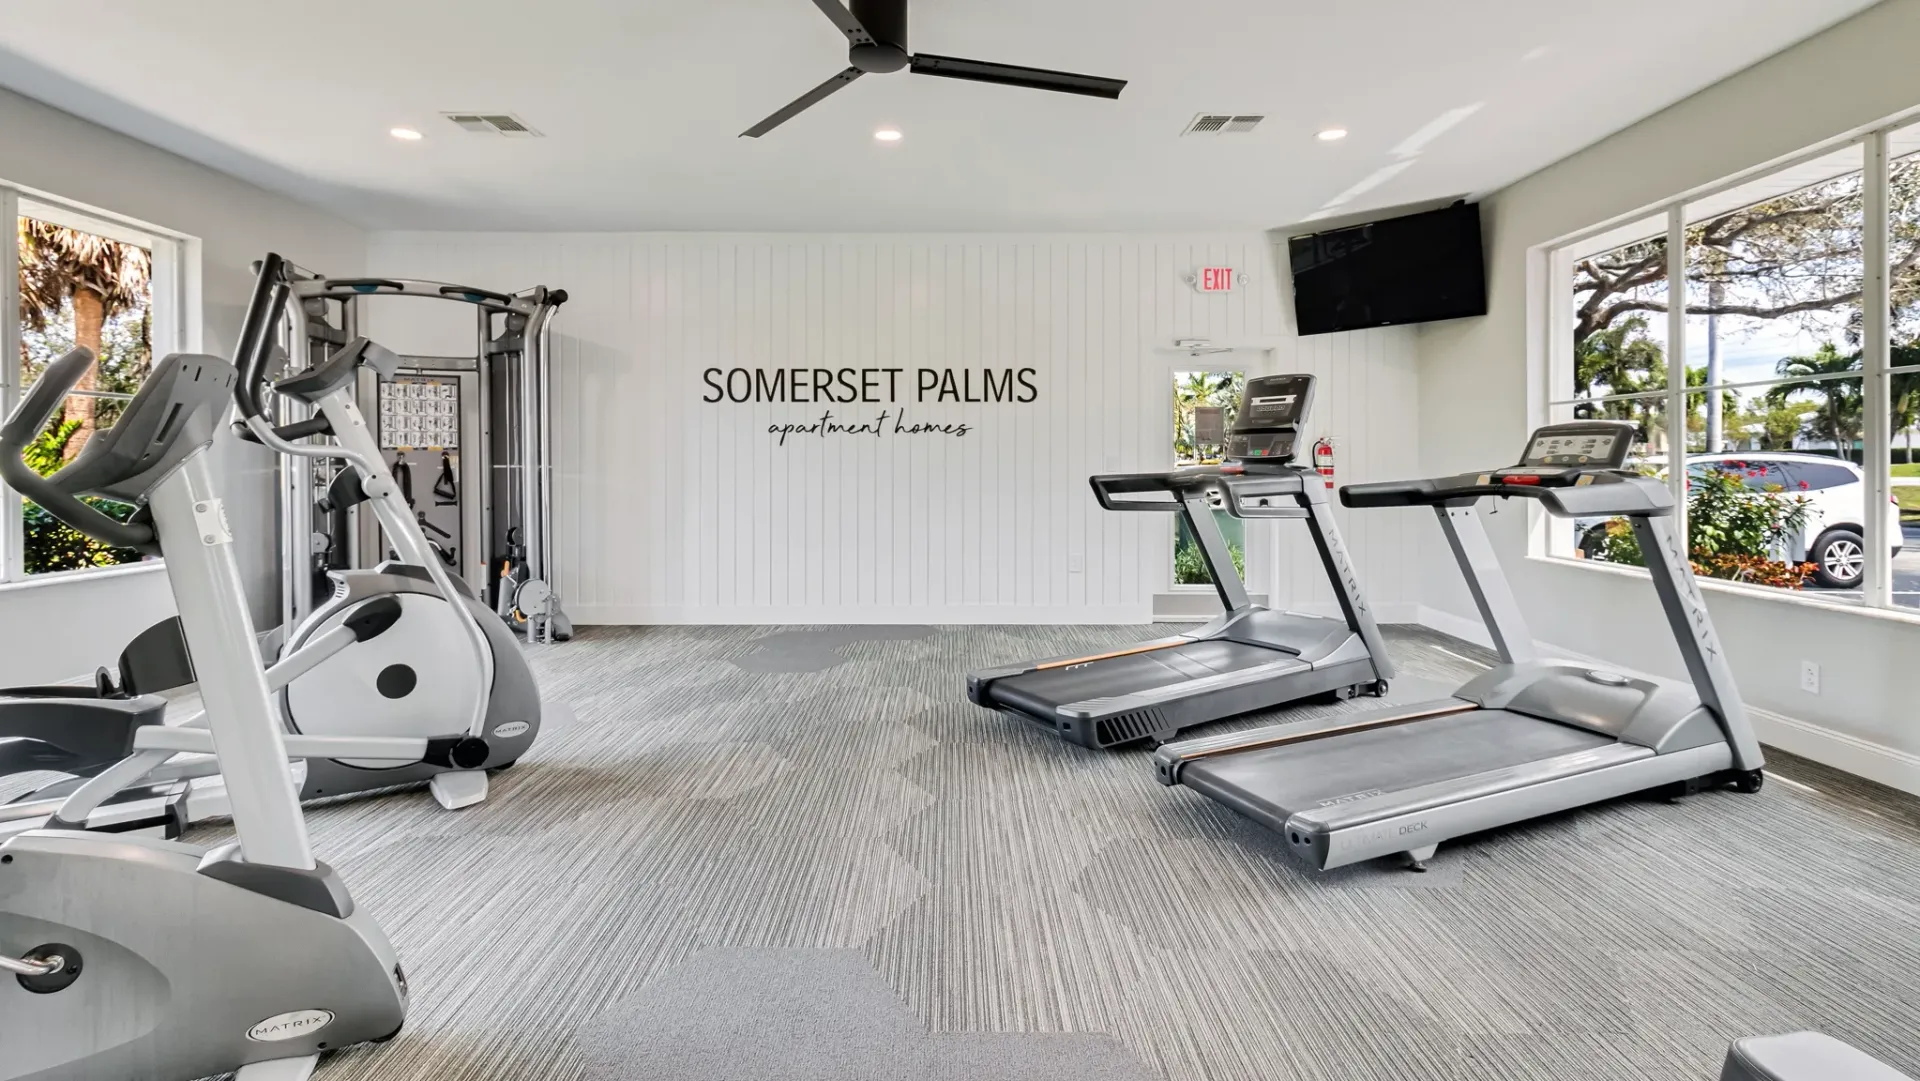 A bright, modern fitness center fully equipped with cardio and weight equipment